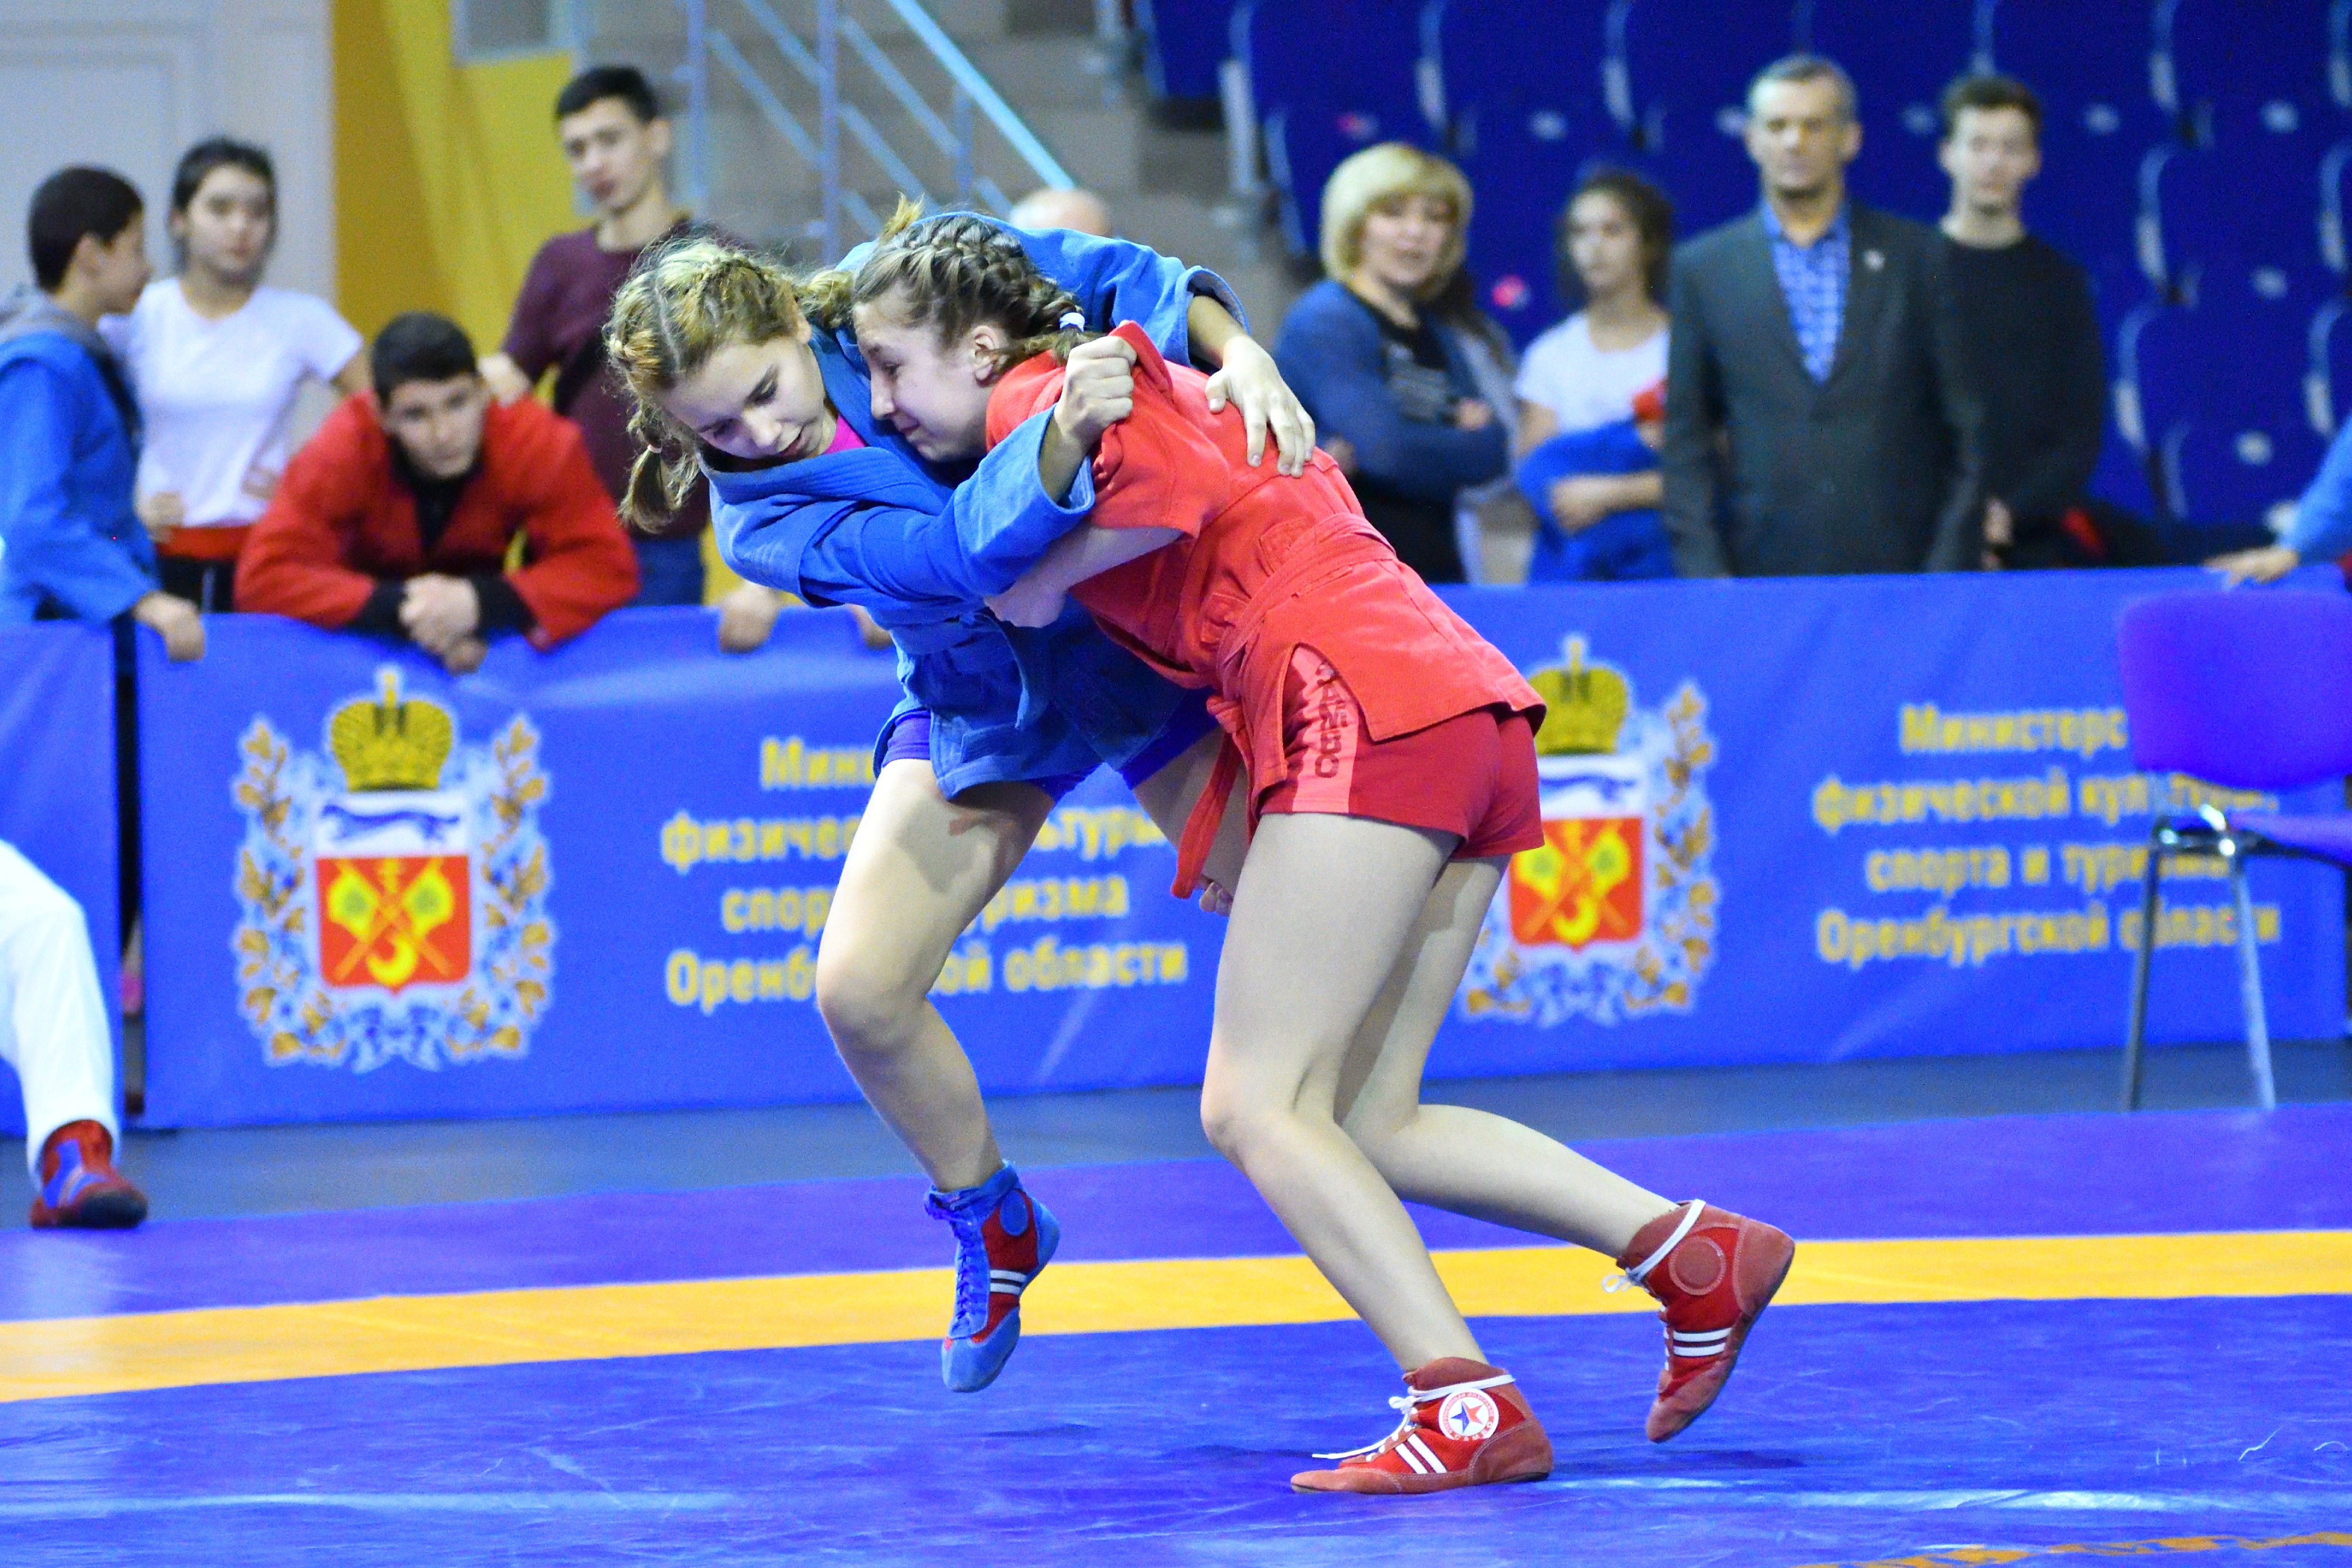 Newer Female Wrestlers, Become An Expert At The Takedown